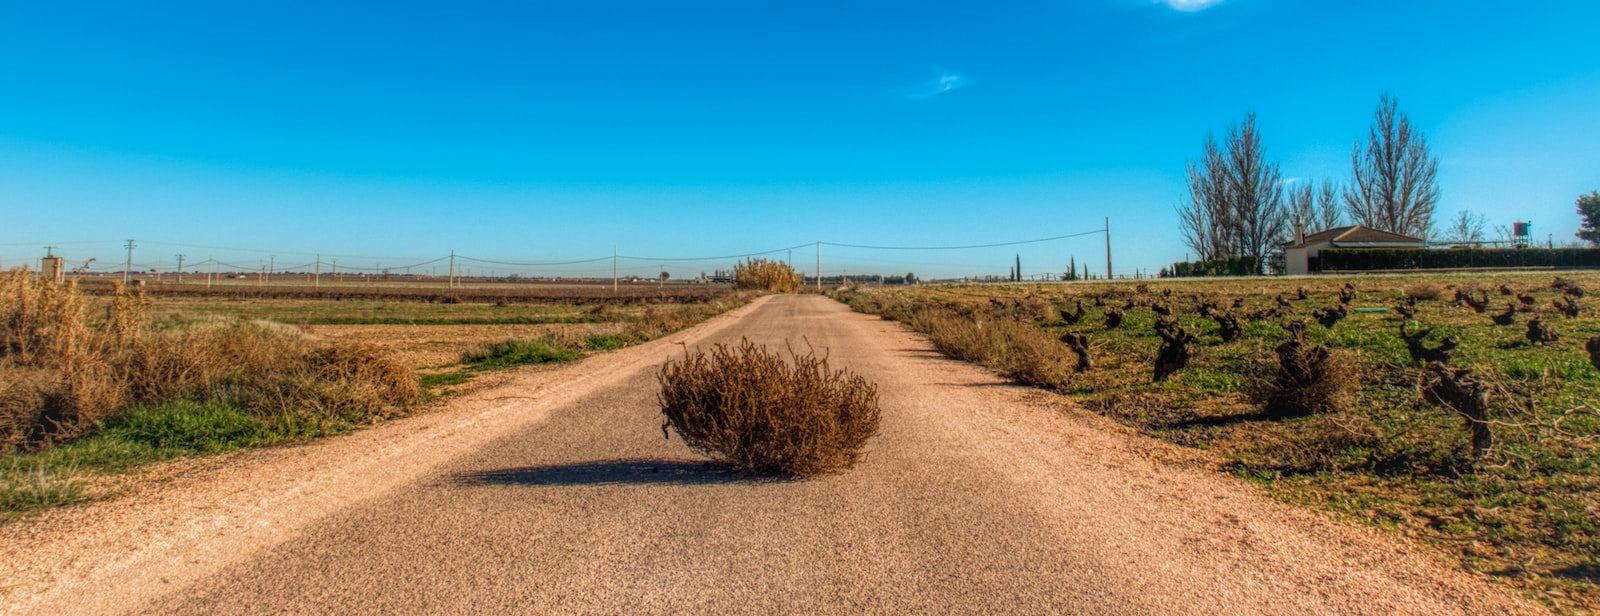 tumbleweed in the middle of the road between field during day